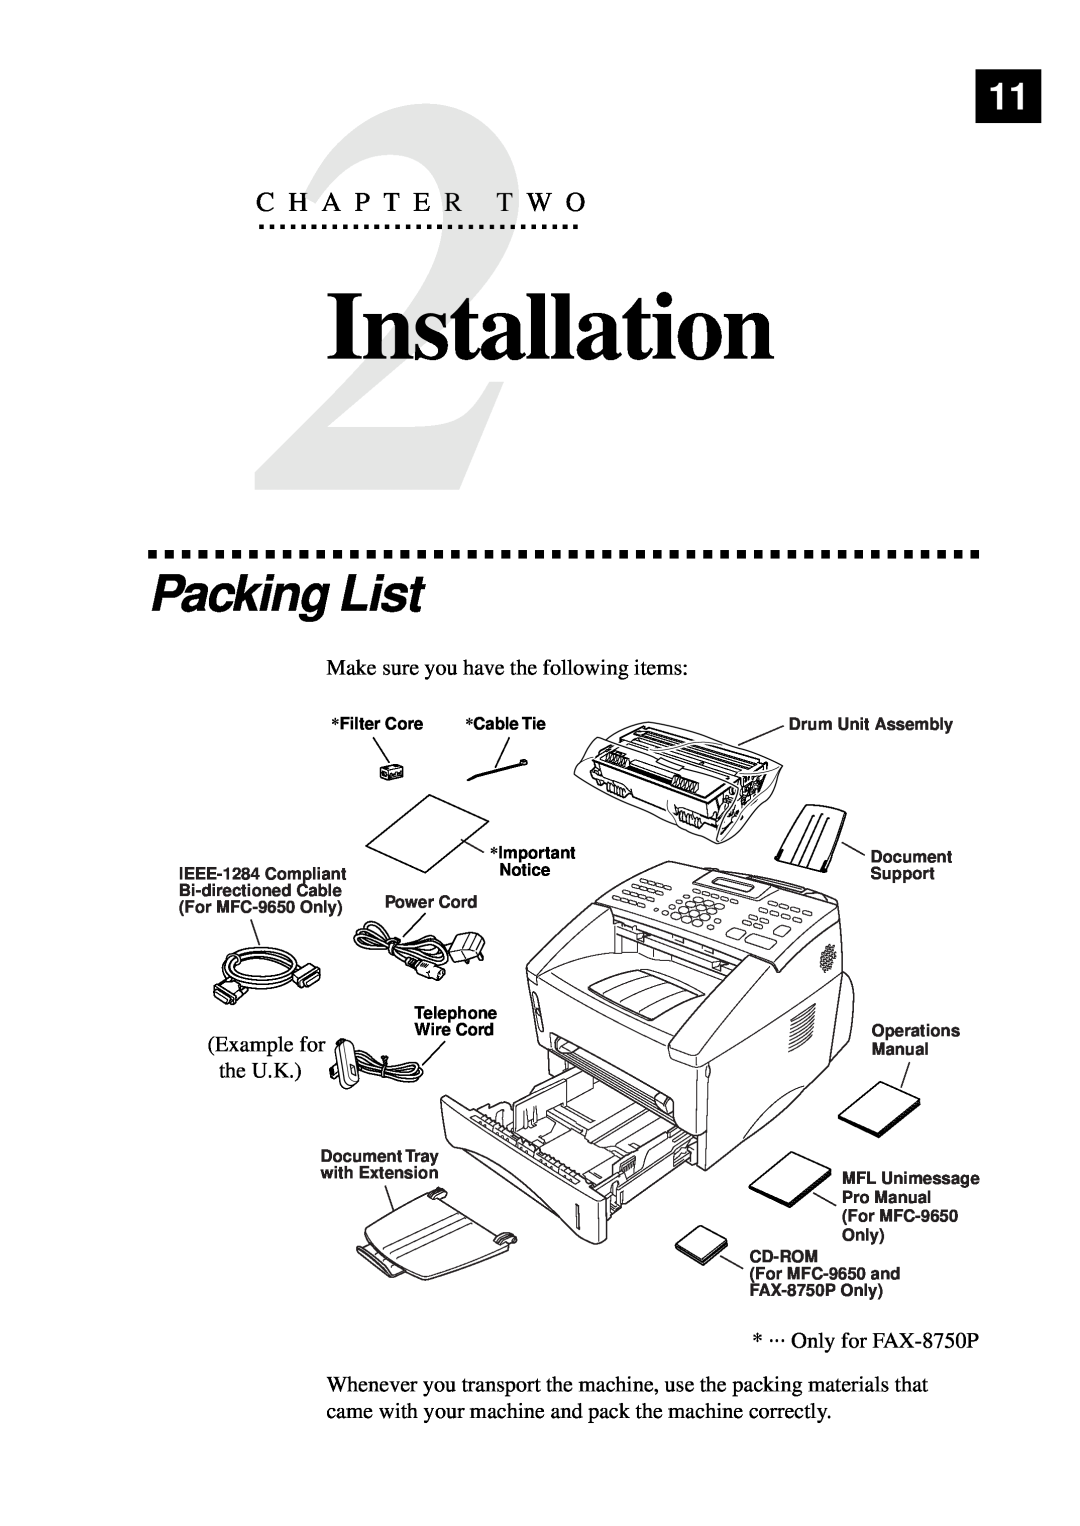 Brother MFC-9650, FAX-8350P owner manual Installation, Packing List, C H A P T E R T W O, Example for, the U.K 